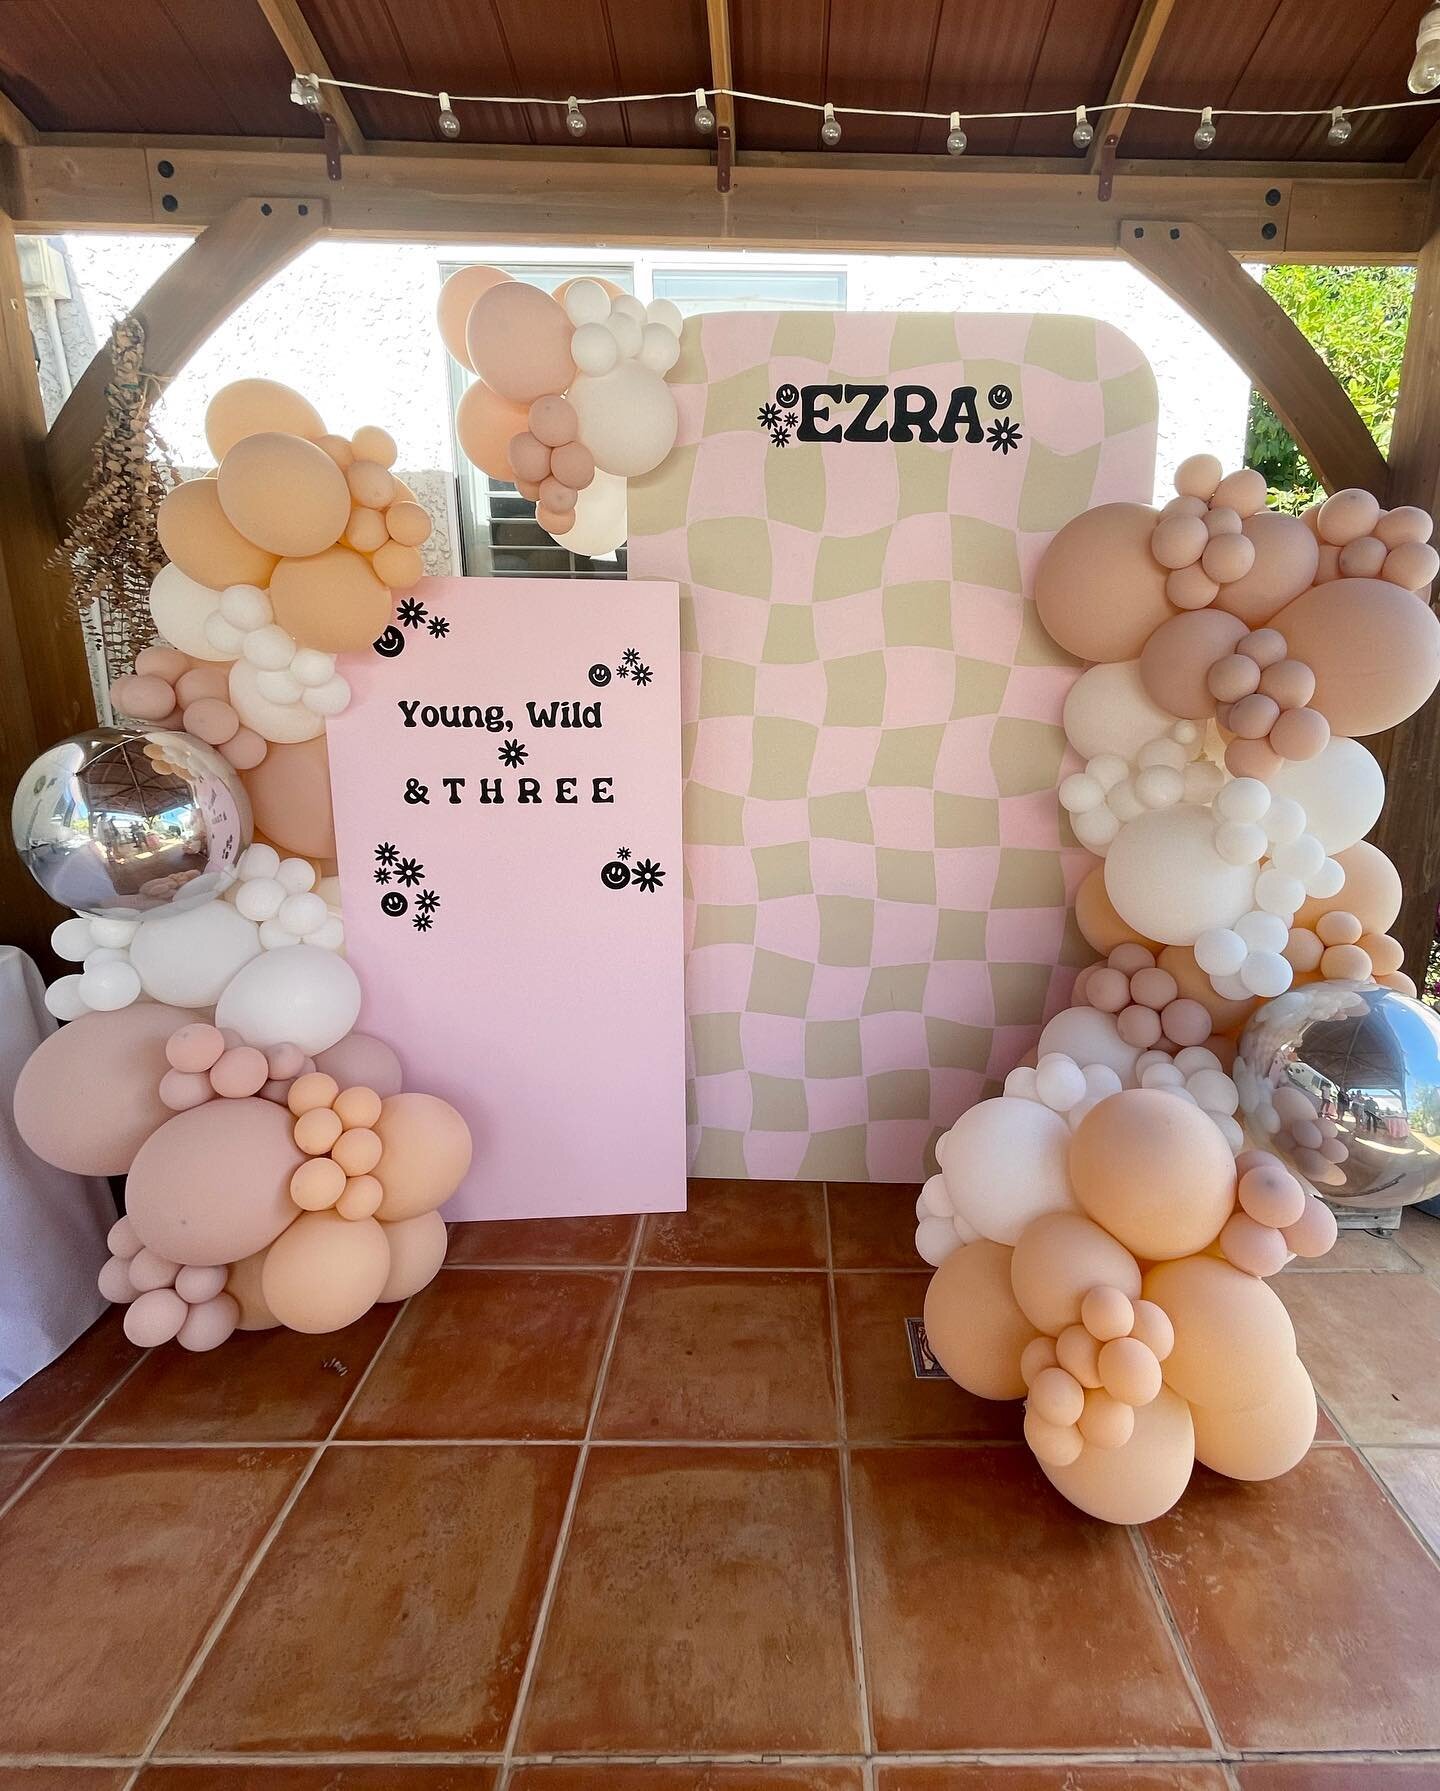 Young, Wild &amp; THREE! 💖

+ concept/decals: @takeitfromhereevents 
+ balloons: @jovialeventsca 
+ panels: @builditfromhere 
+ cake: @sugarbank_la 
+ cookies: @rosebakery 

#youngwildandthree #wavycheckeredpattern #checkered #kidsparty #kidspartyid